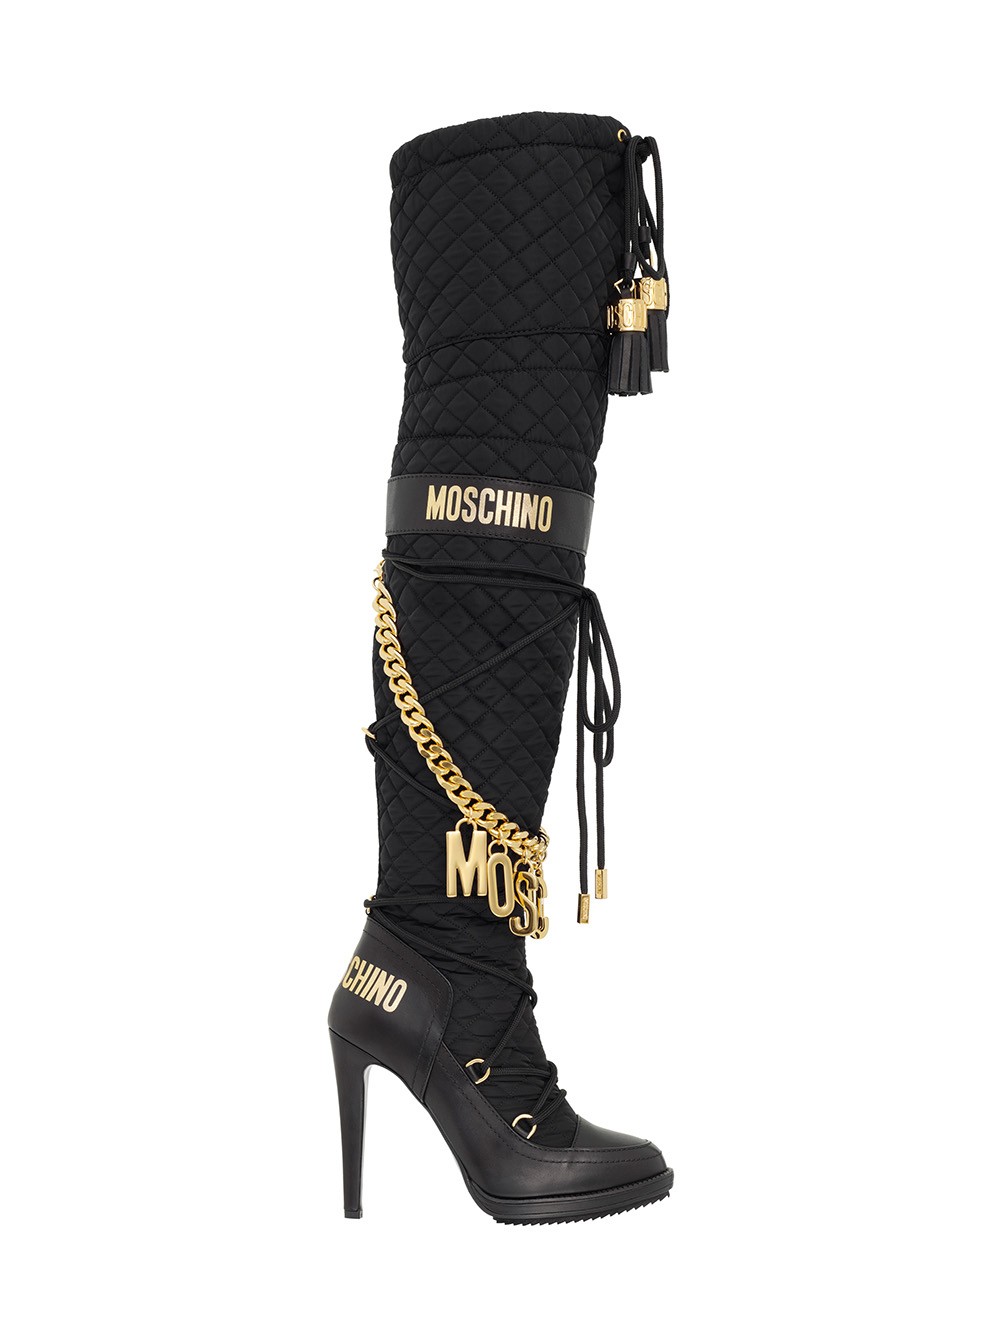 MOSCHINO [TV] H&M Boots $549.00